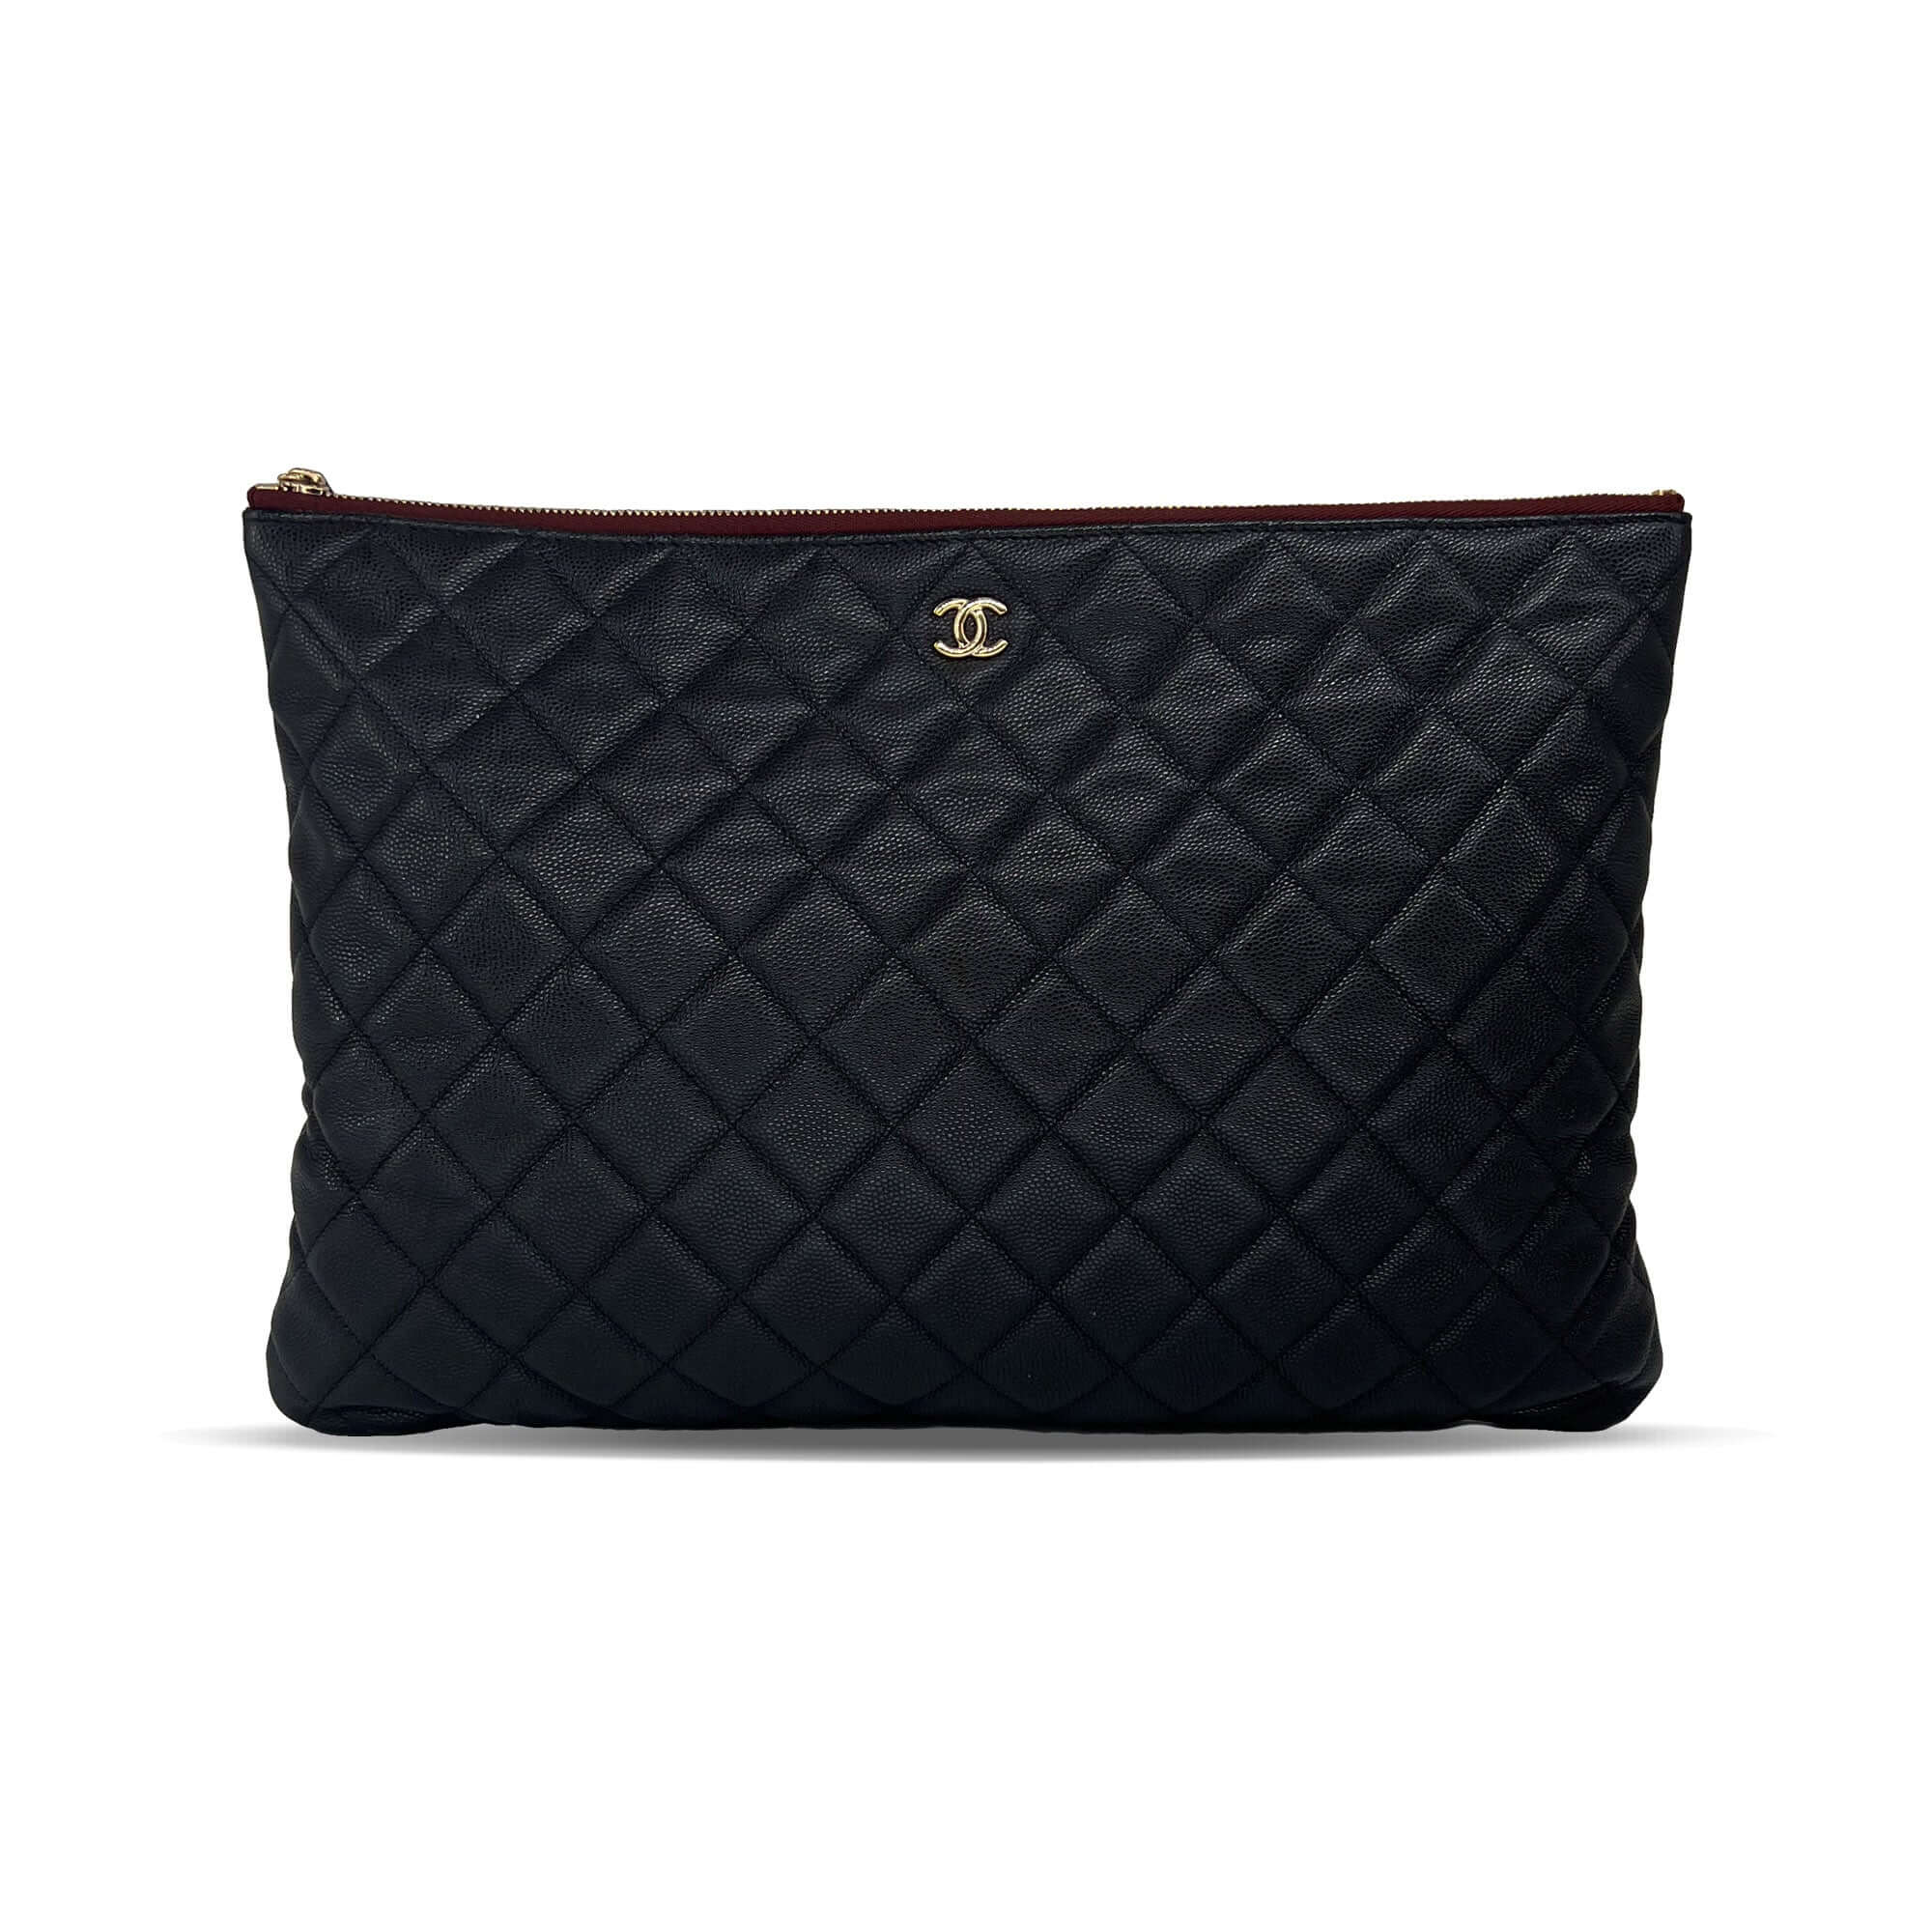 Pre owned Chanel black quilted caviar leather large o-case zip